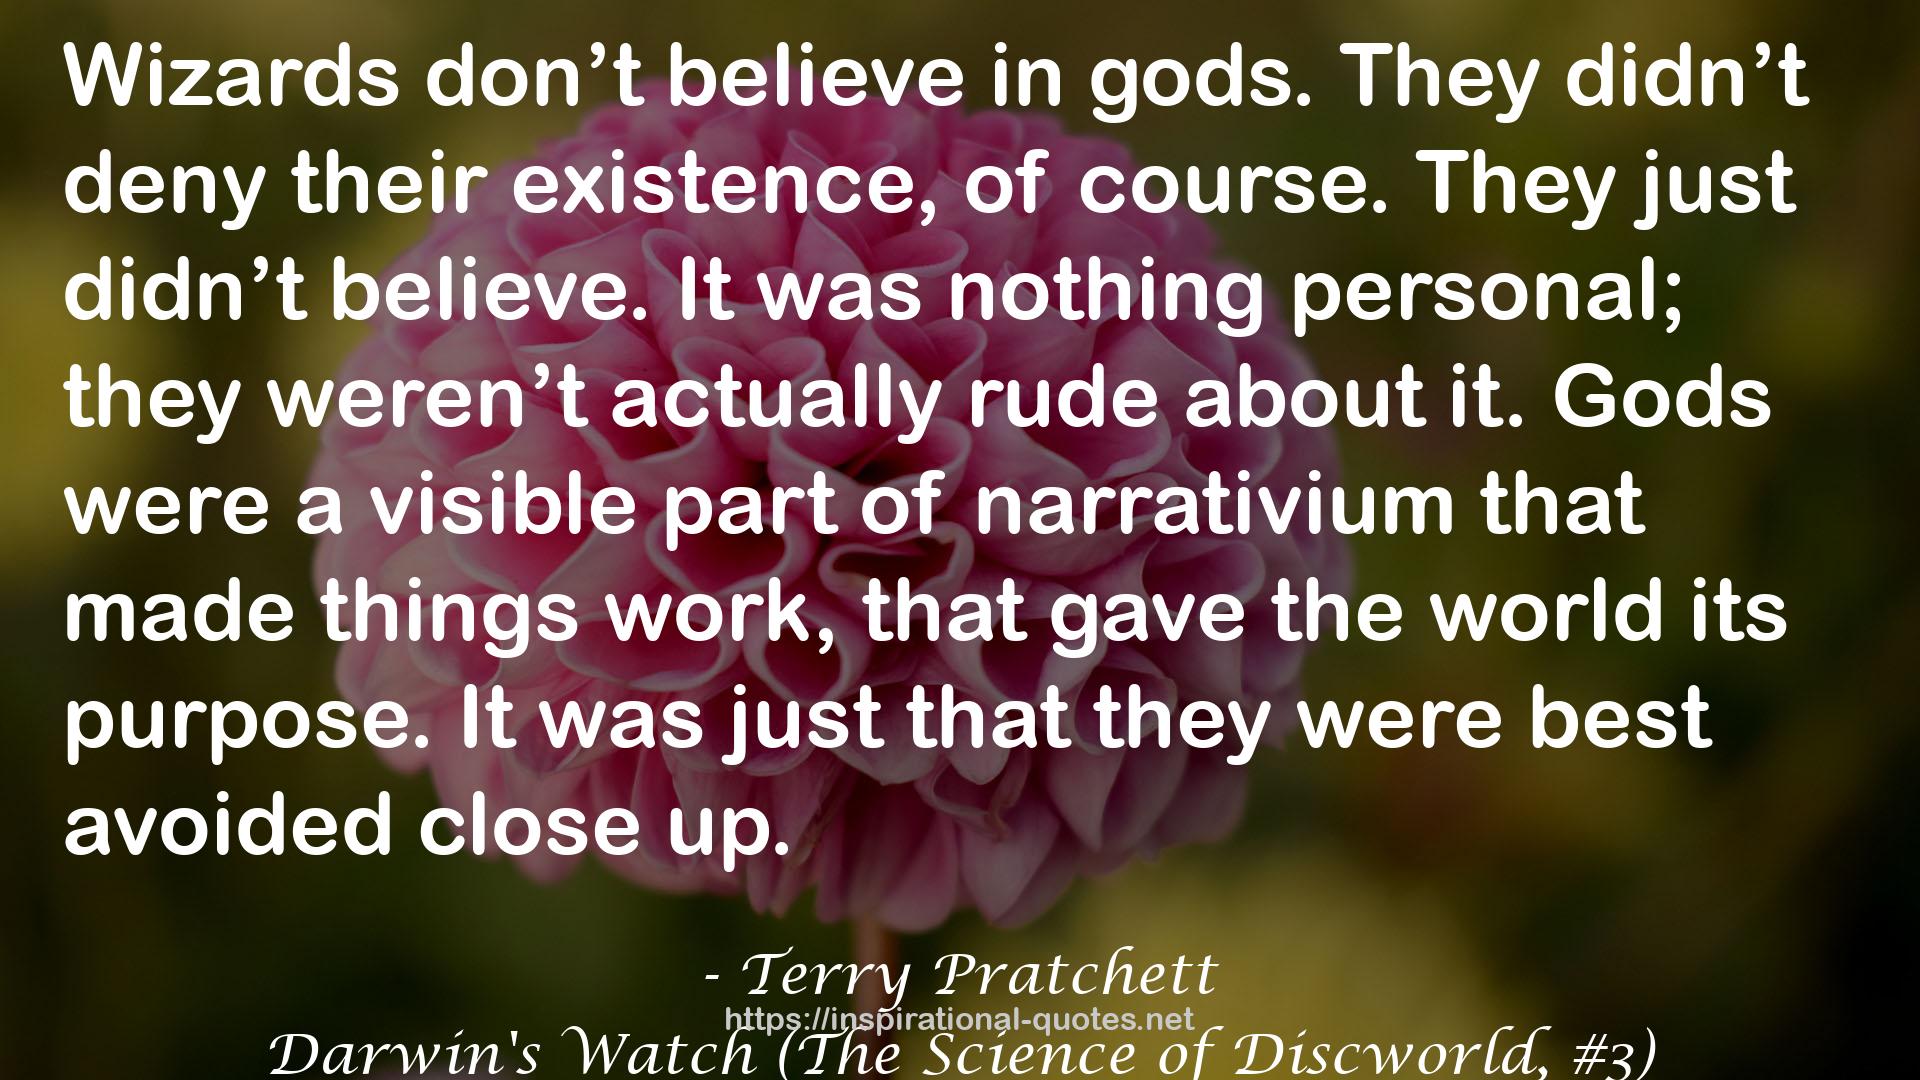 Darwin's Watch (The Science of Discworld, #3) QUOTES